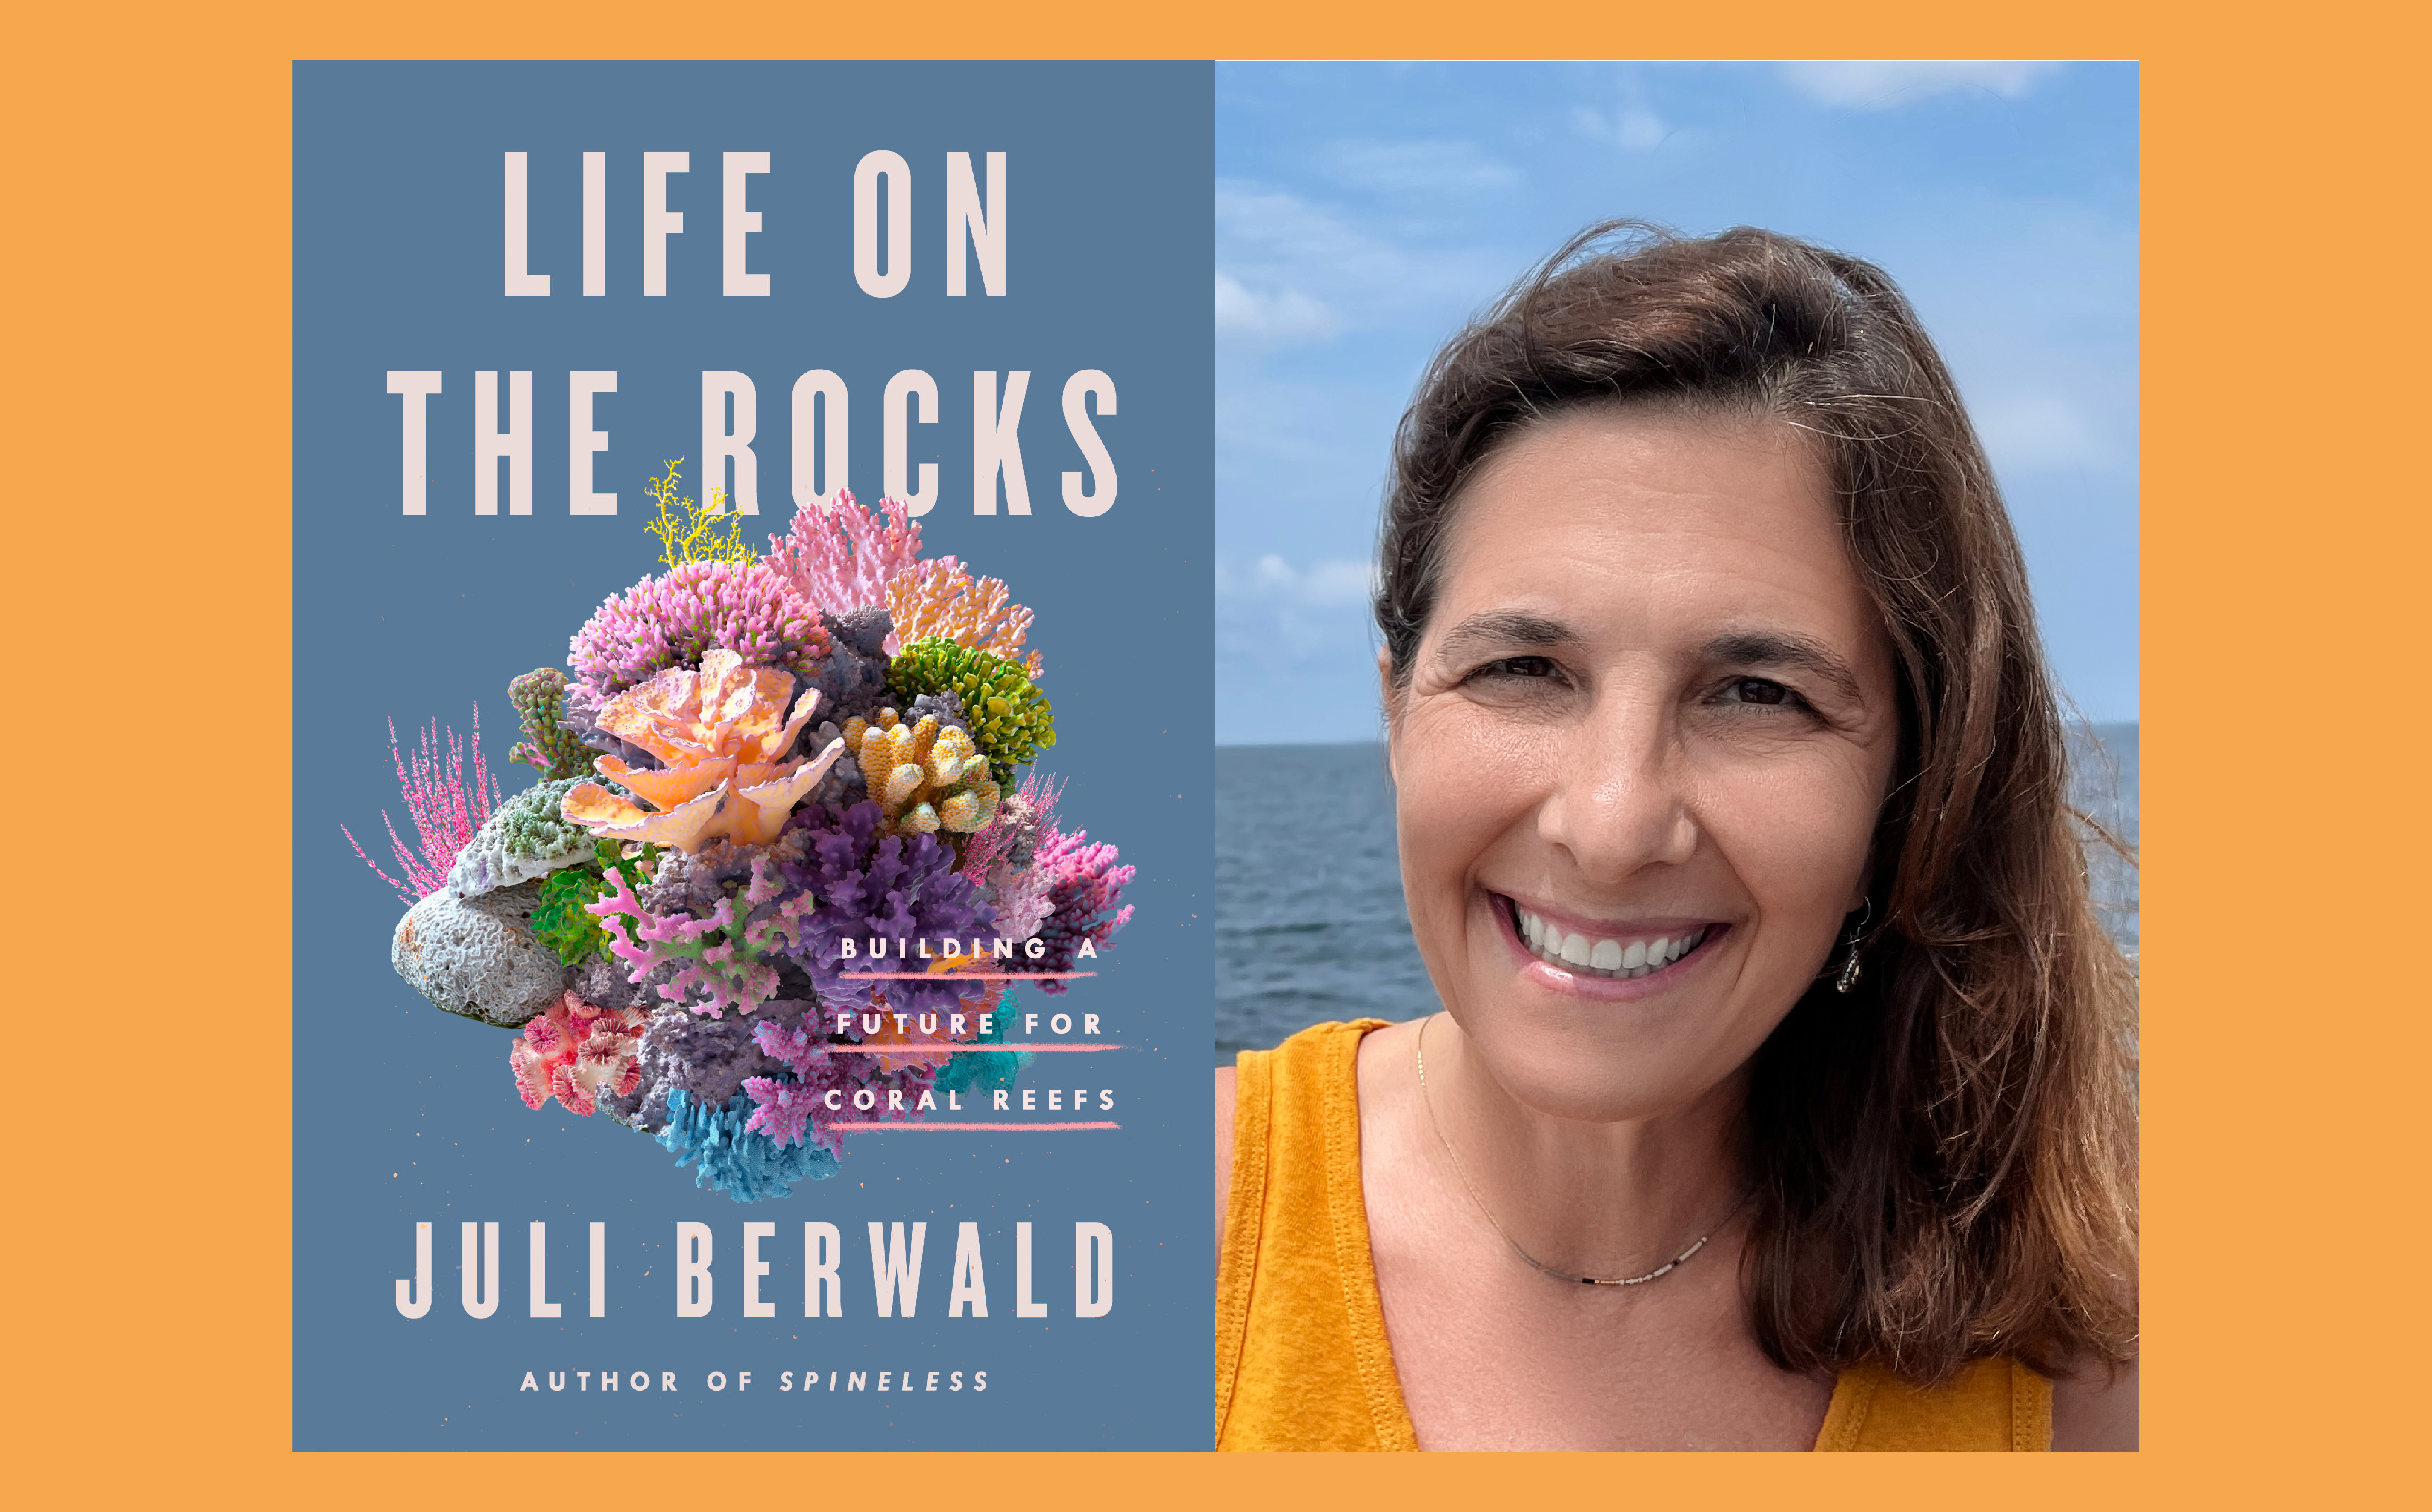 A split-screen image, with portrait of the book cover of Life on the Rocks on the left and Juli Berwald on the left.